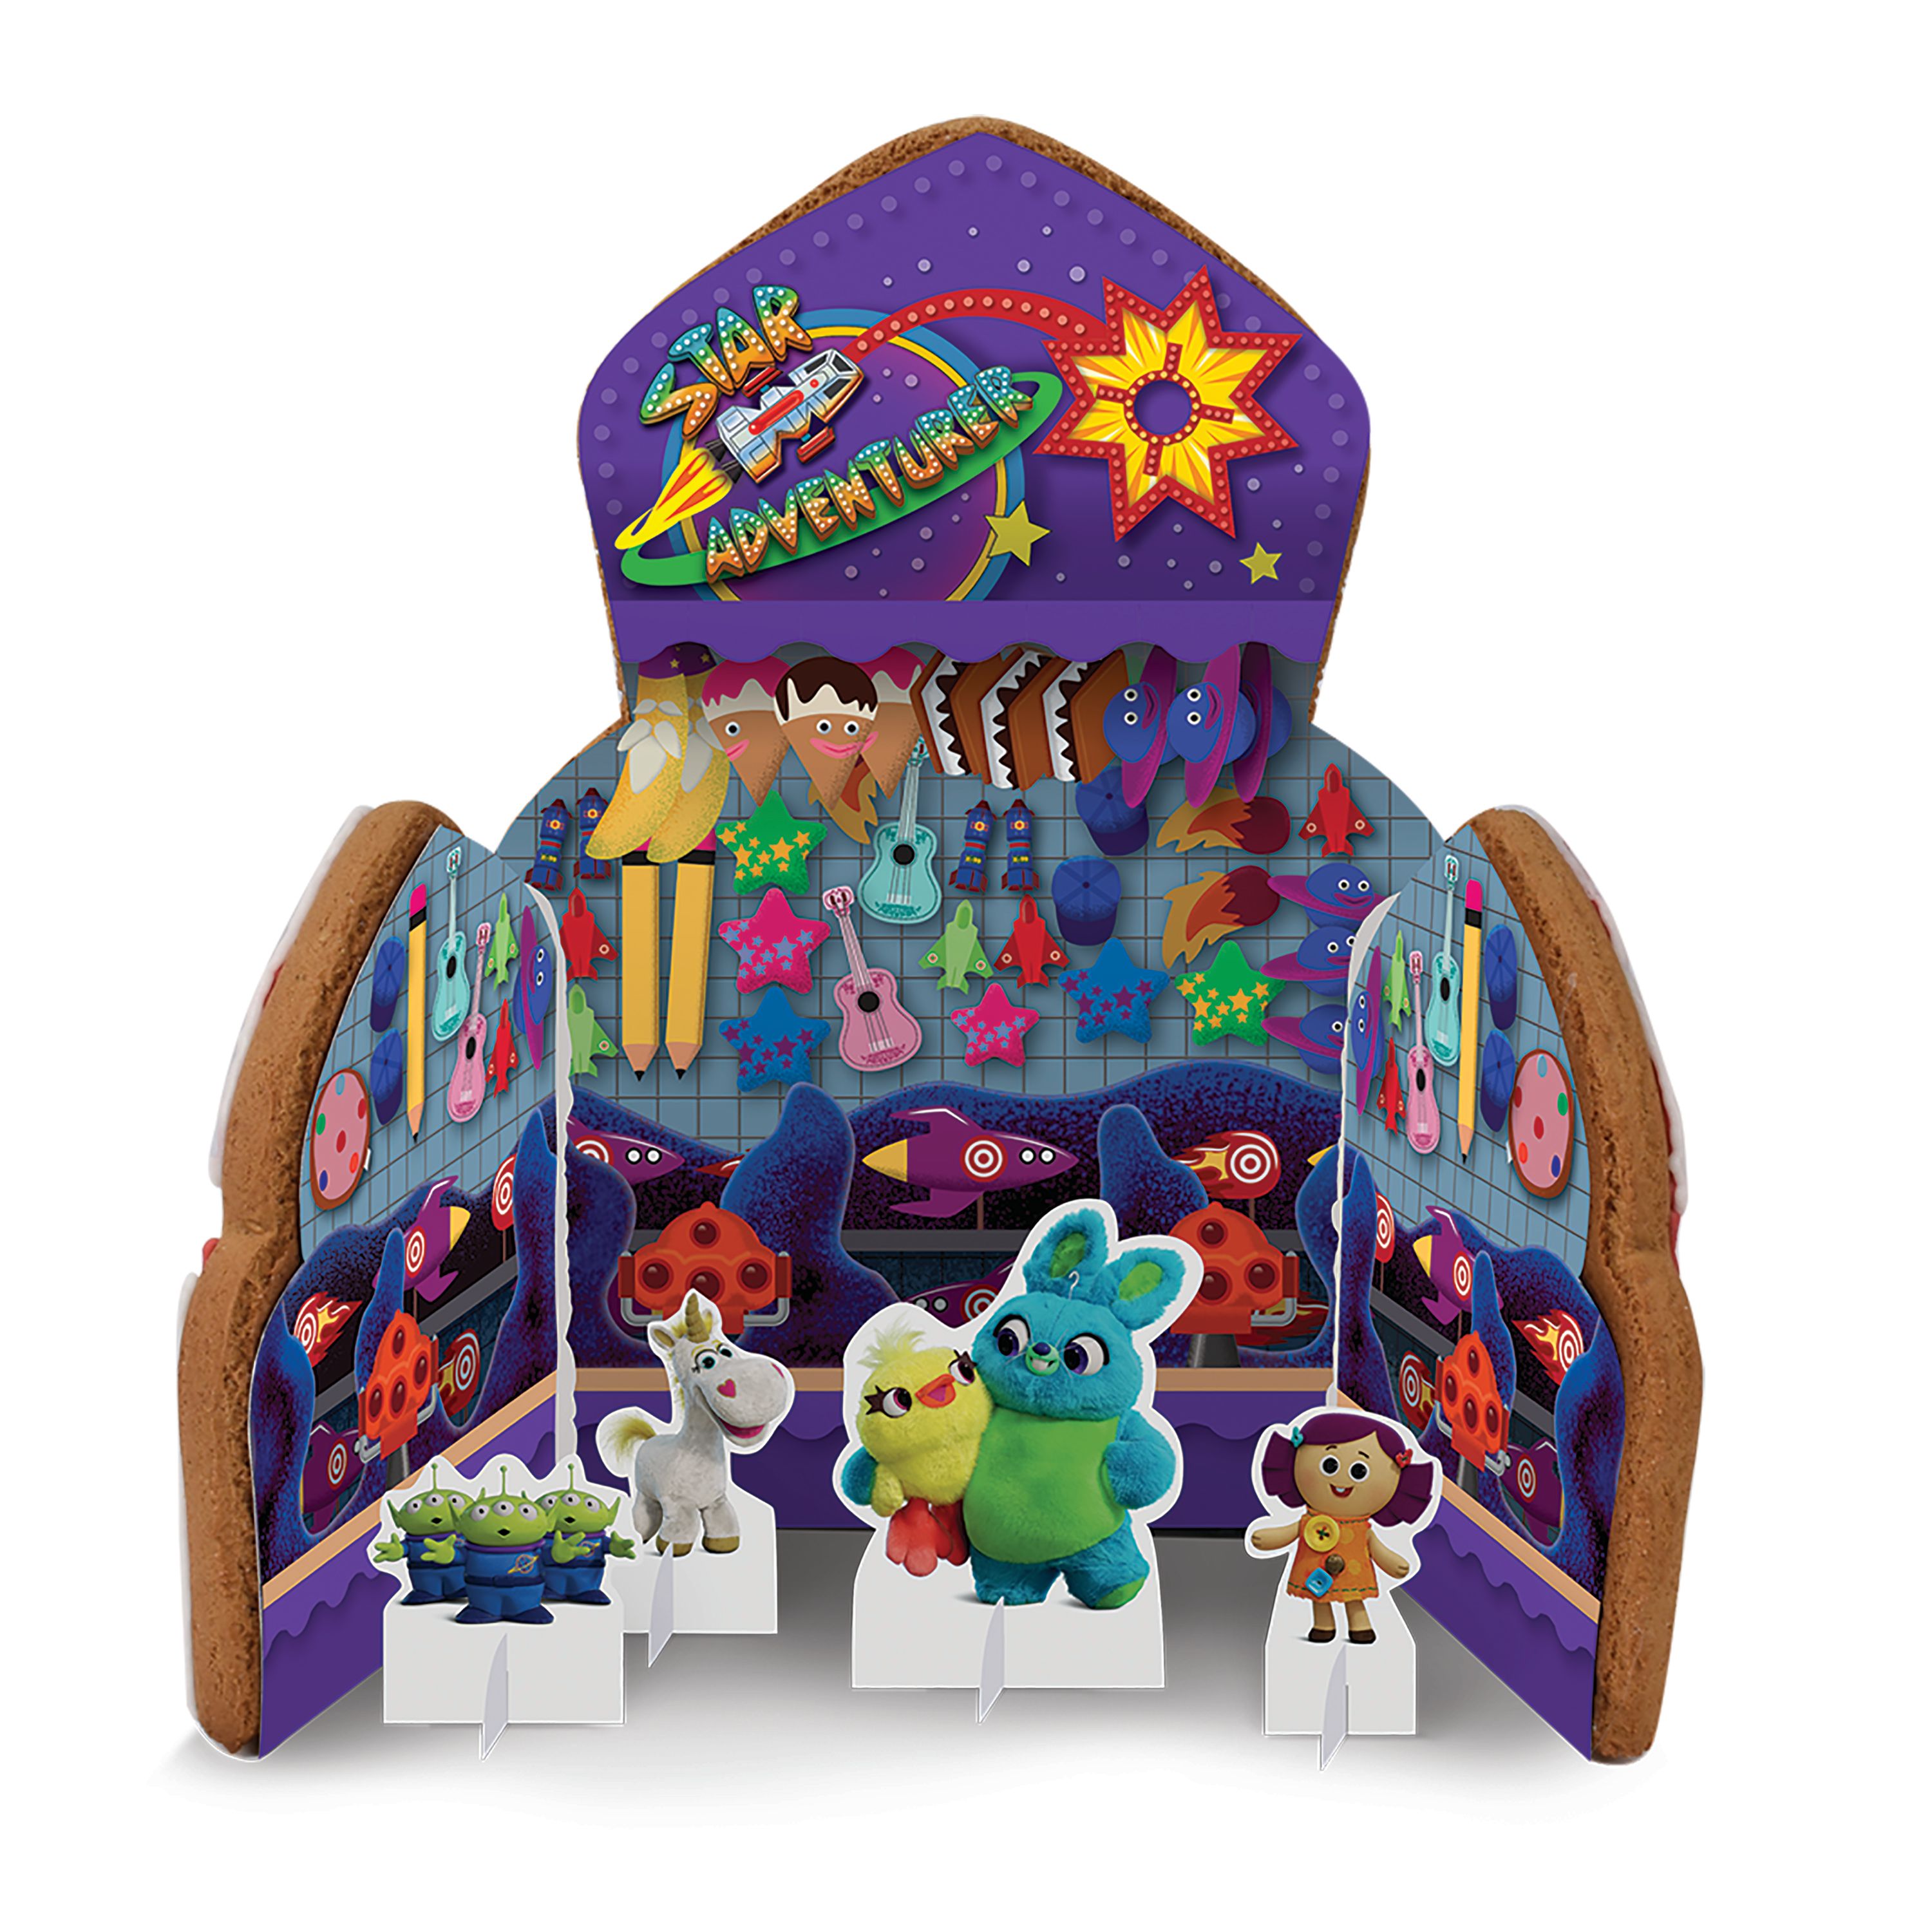 Toy Story 4 Carnival Gingerbread - image 4 of 4